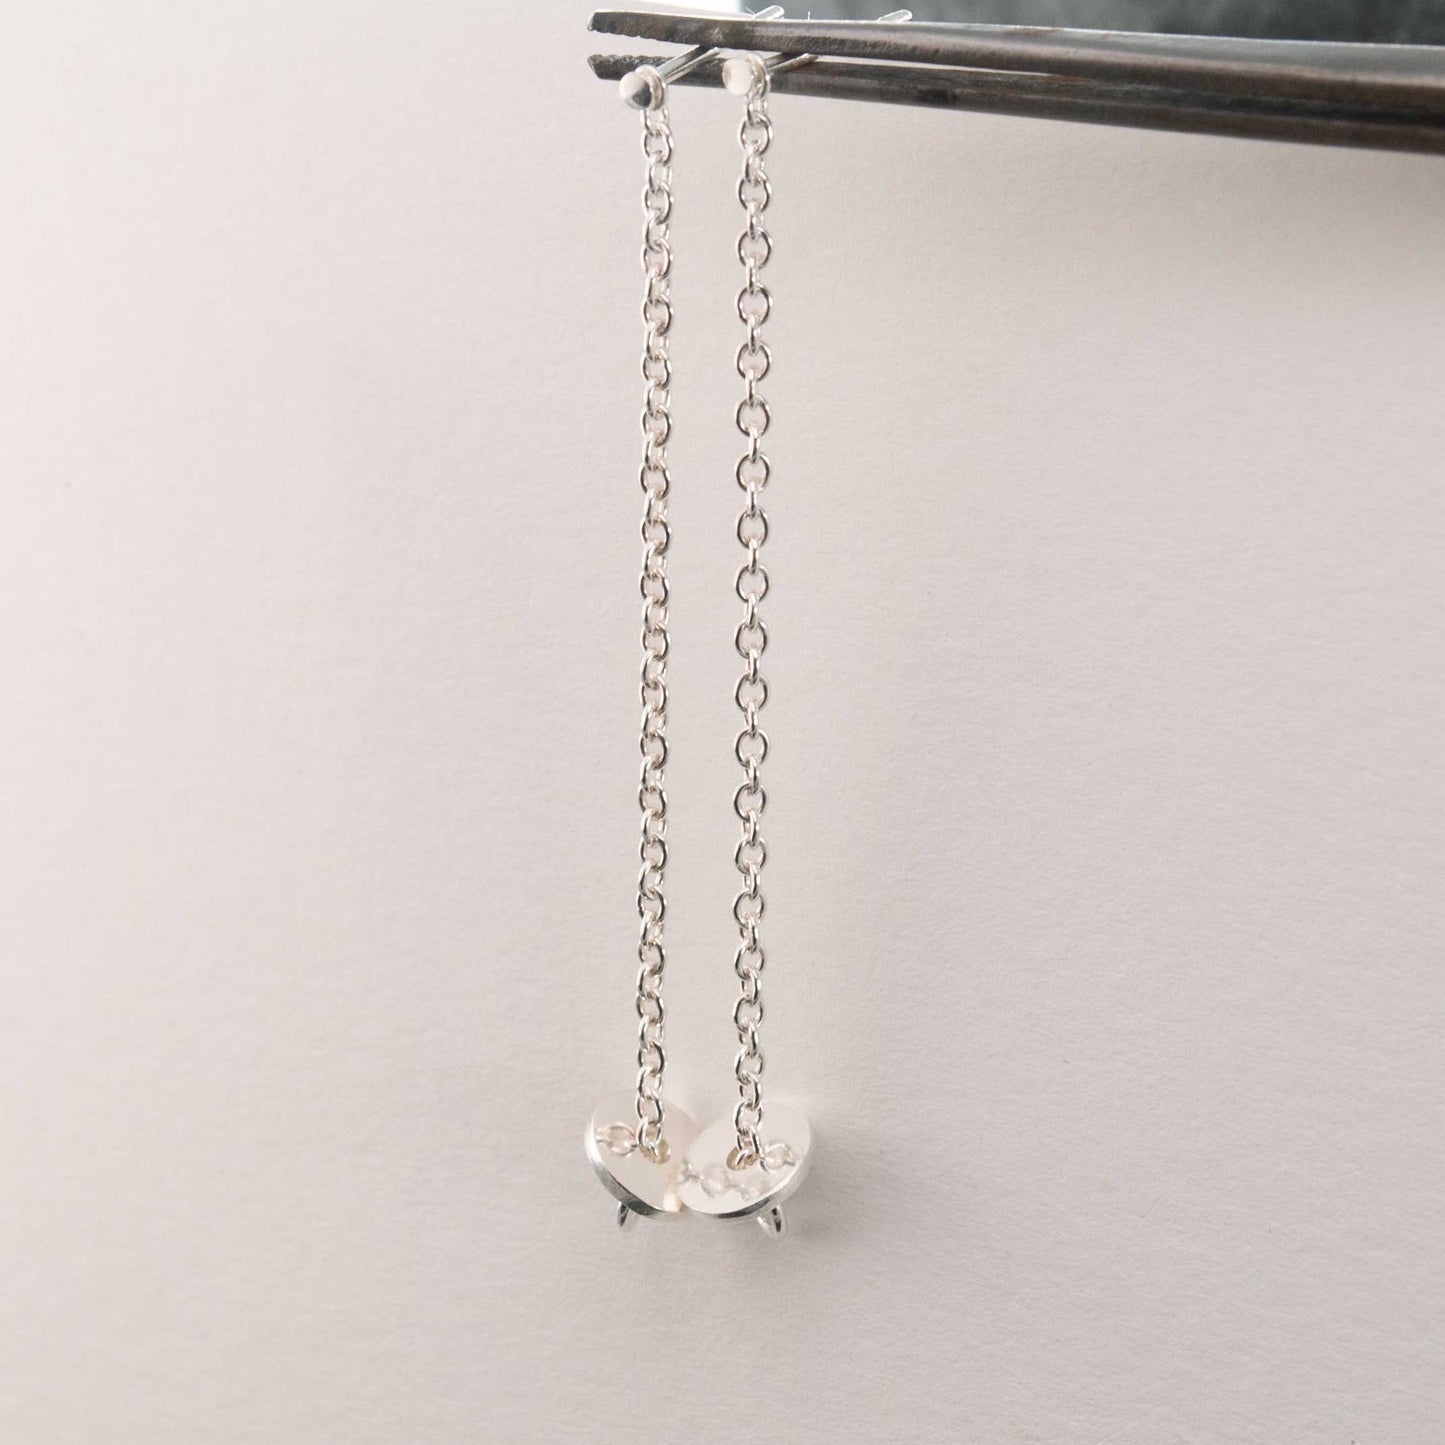 Long Silver Chain earrings with small disc pendants